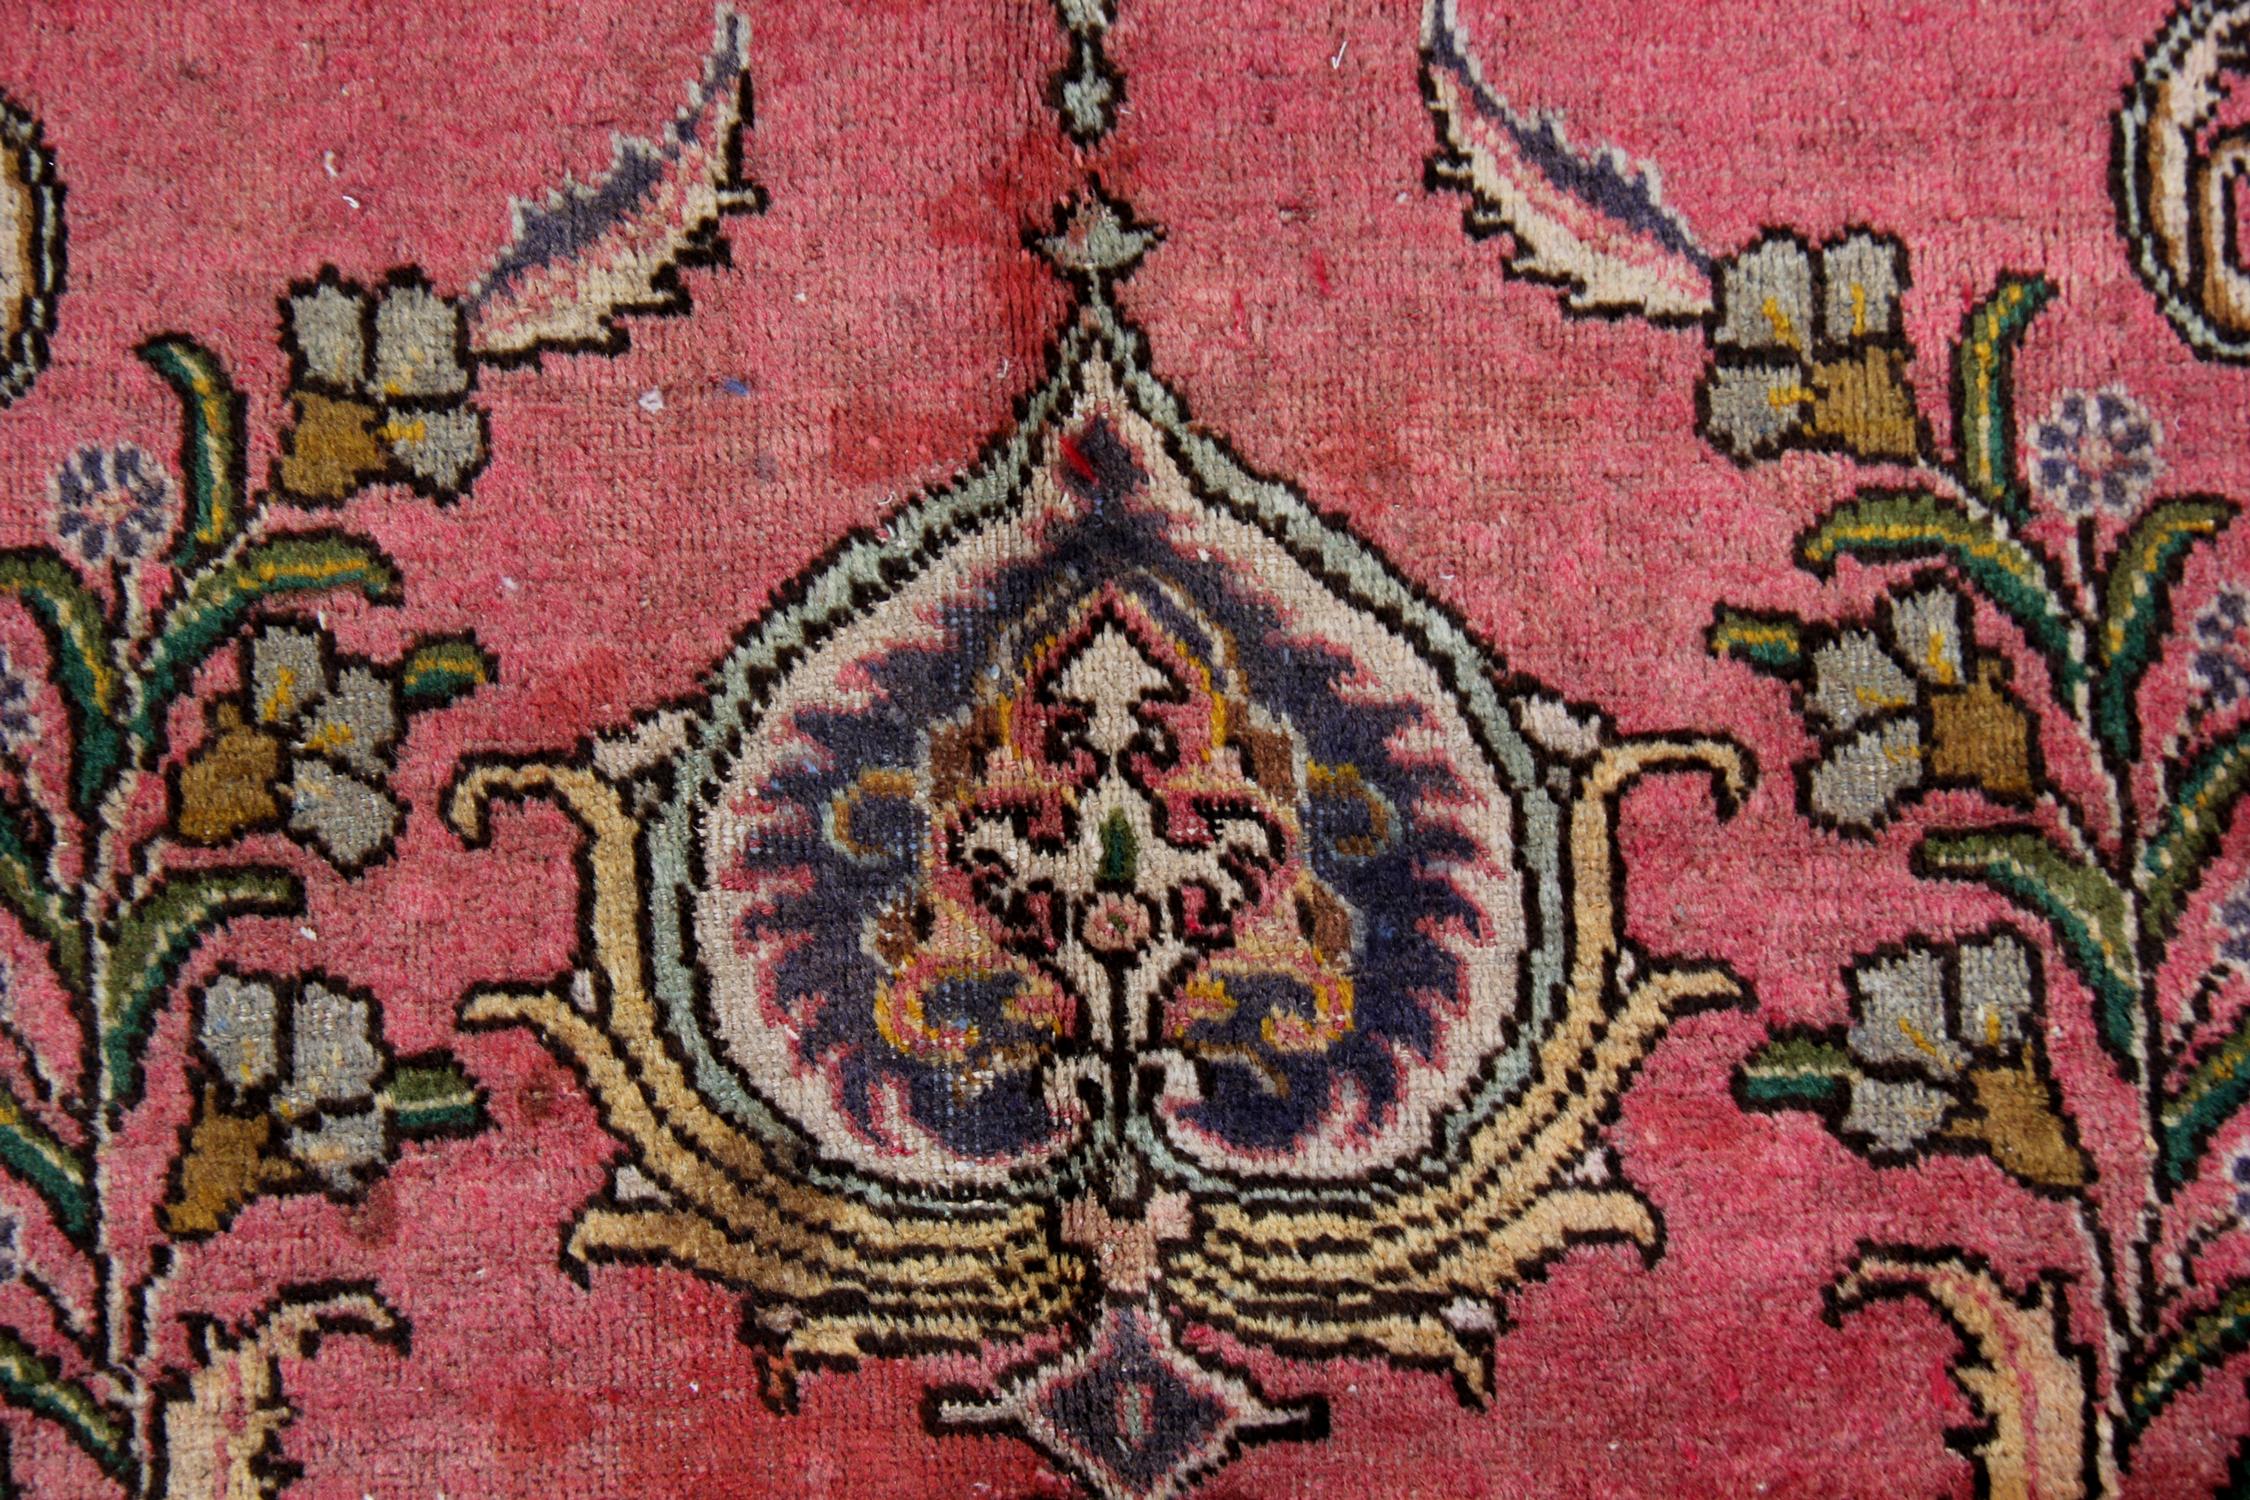 This luxurious carpet has been woven with a rich wine-red background with cream, blue, green and pink accents that make up the intricate, highly-decorative medallion and surrounding design. The floating medallion and complex surrounding patterns